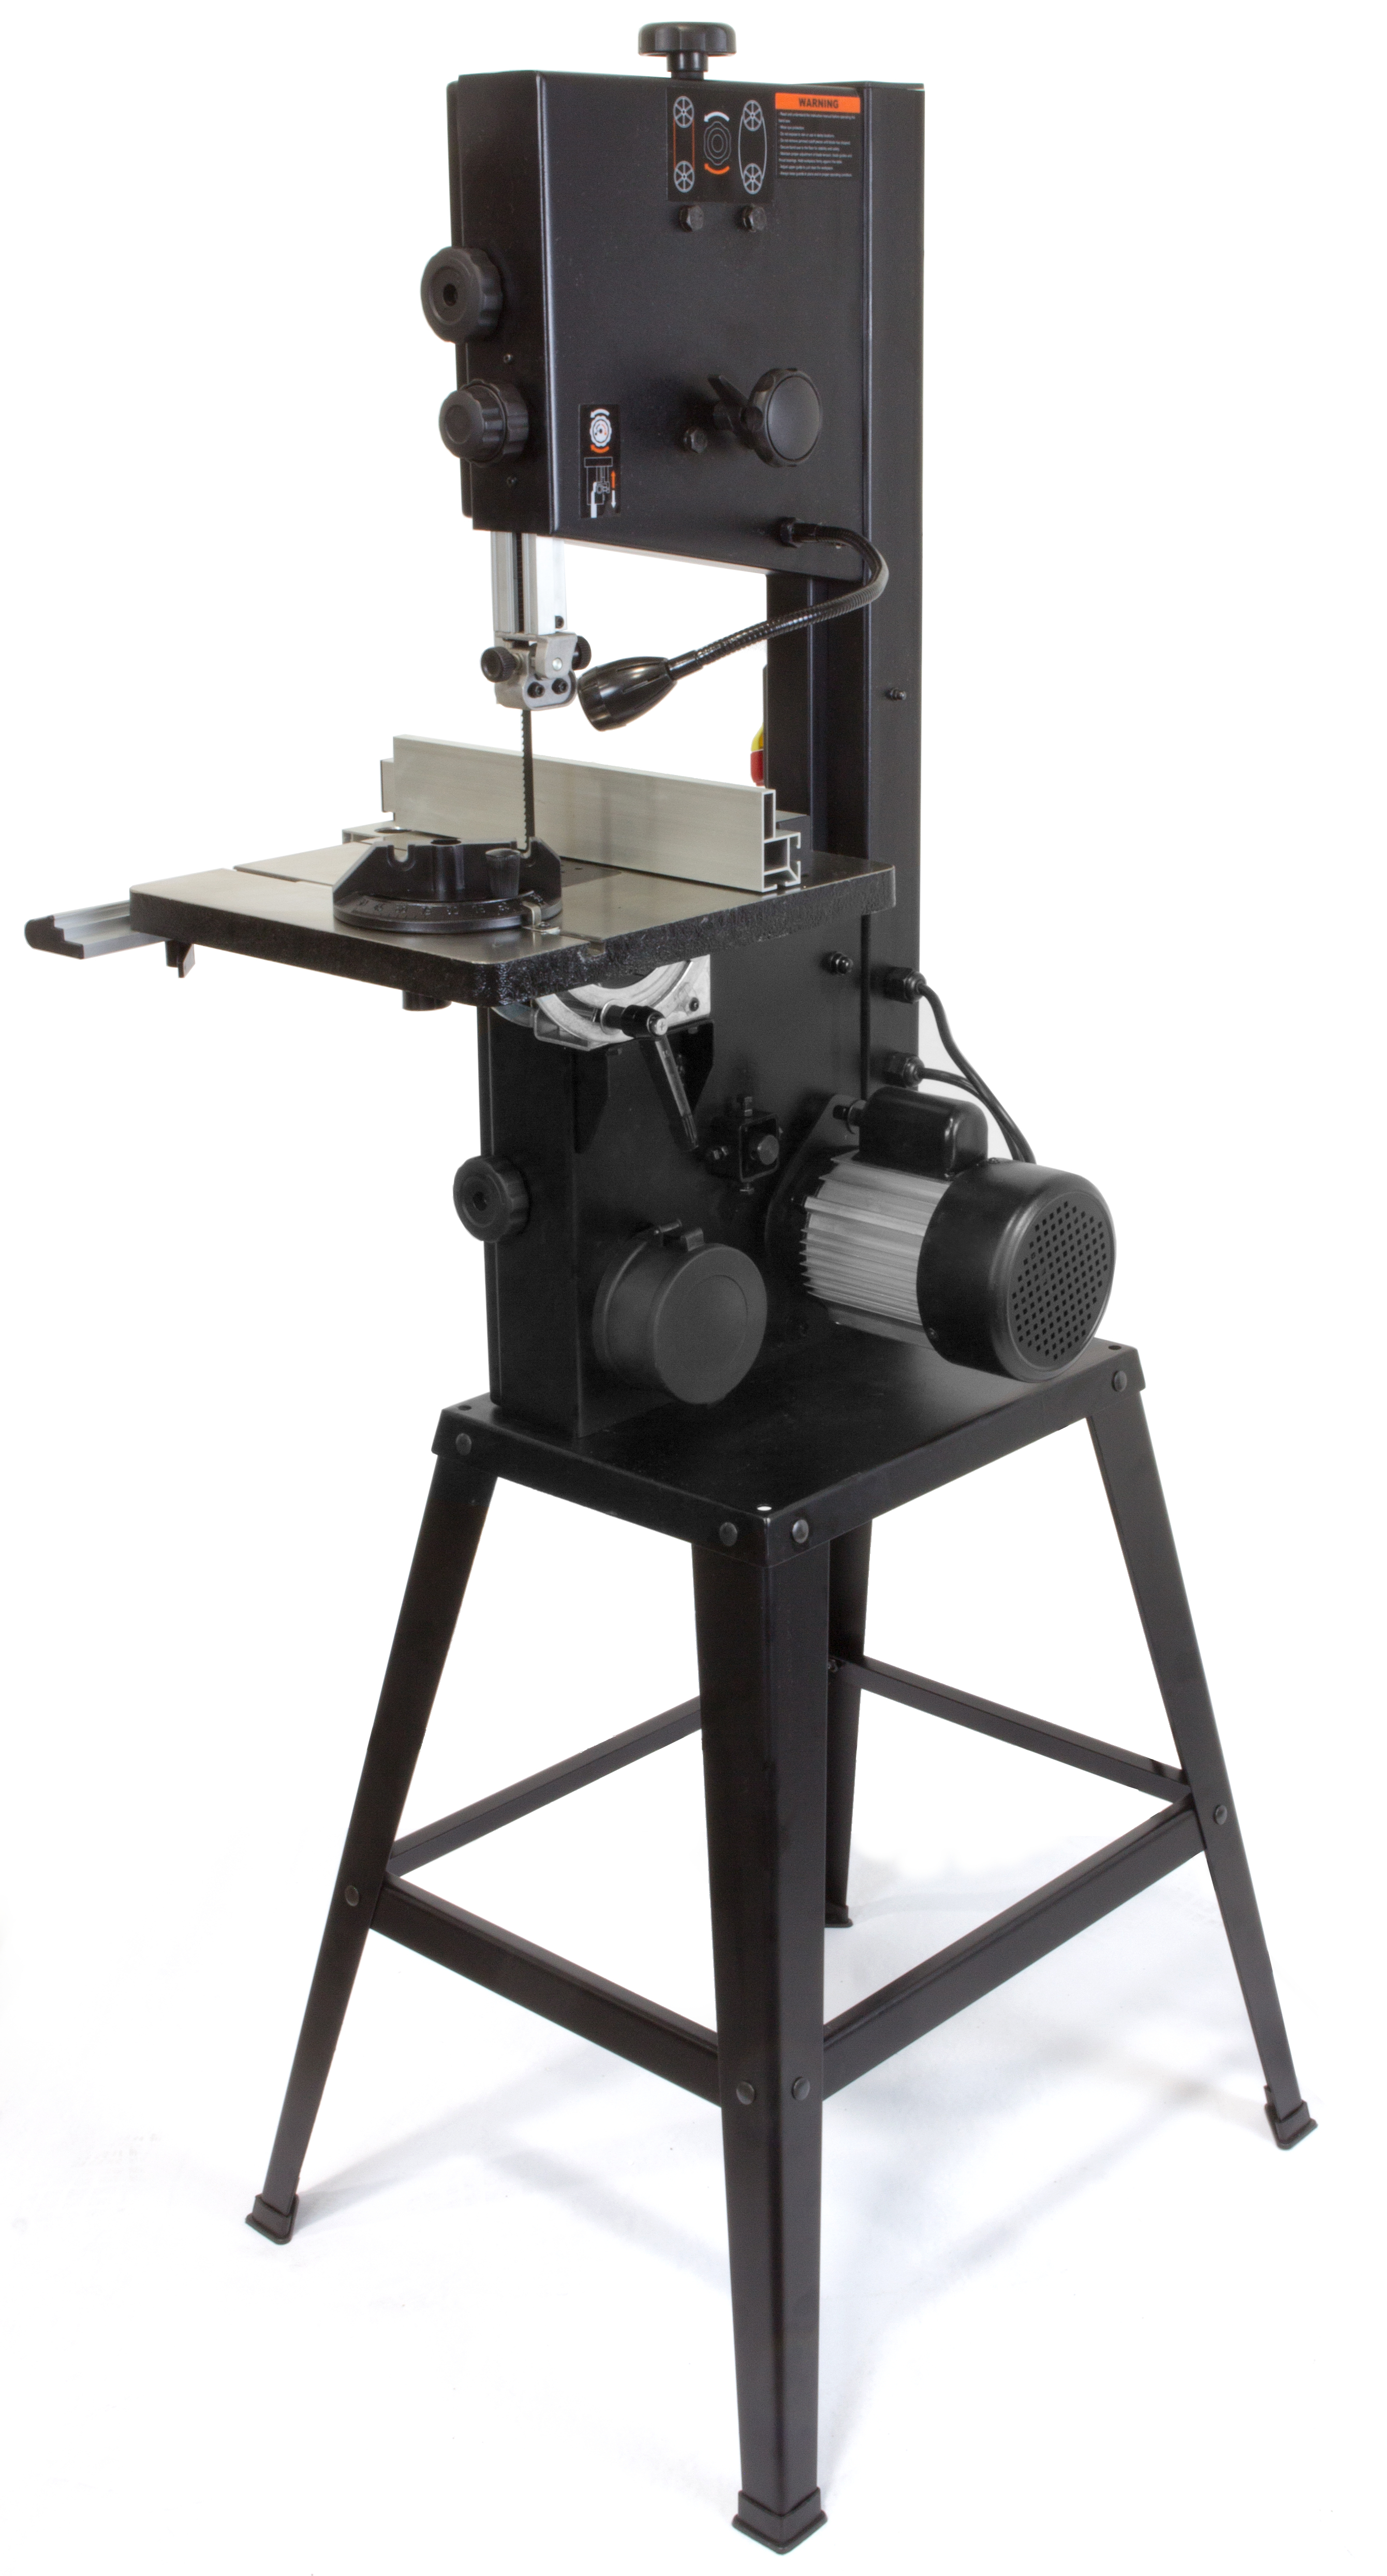 WEN 3.5-Amp 10-Inch Two-Speed Band Saw with Stand and Worklight, 3962 - image 3 of 7